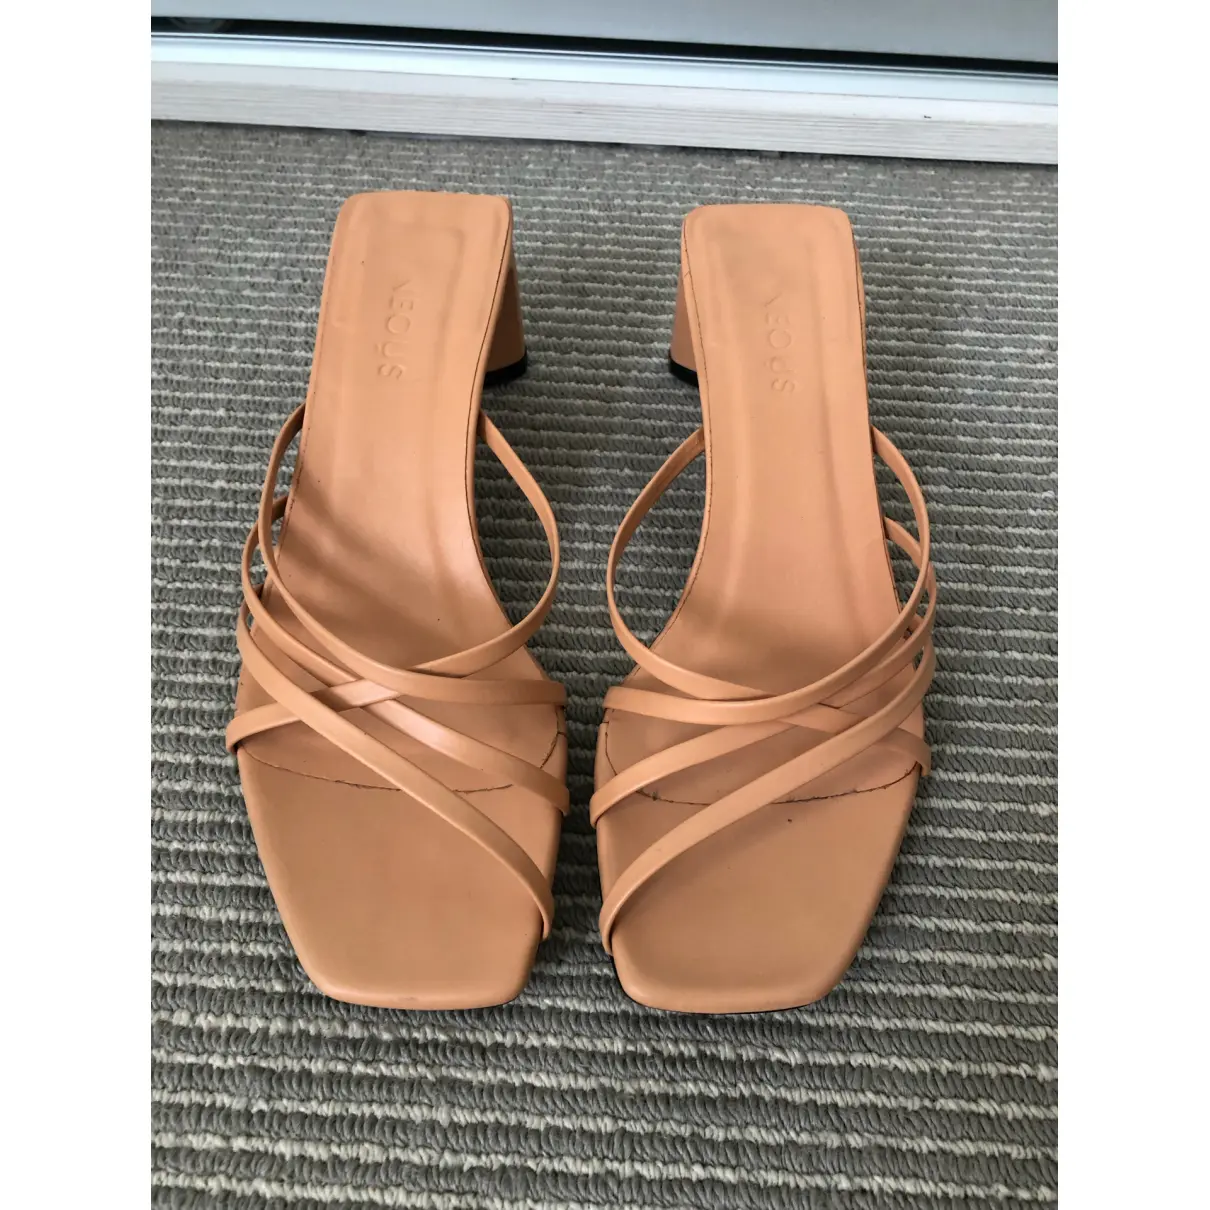 Buy Neous Leather sandals online